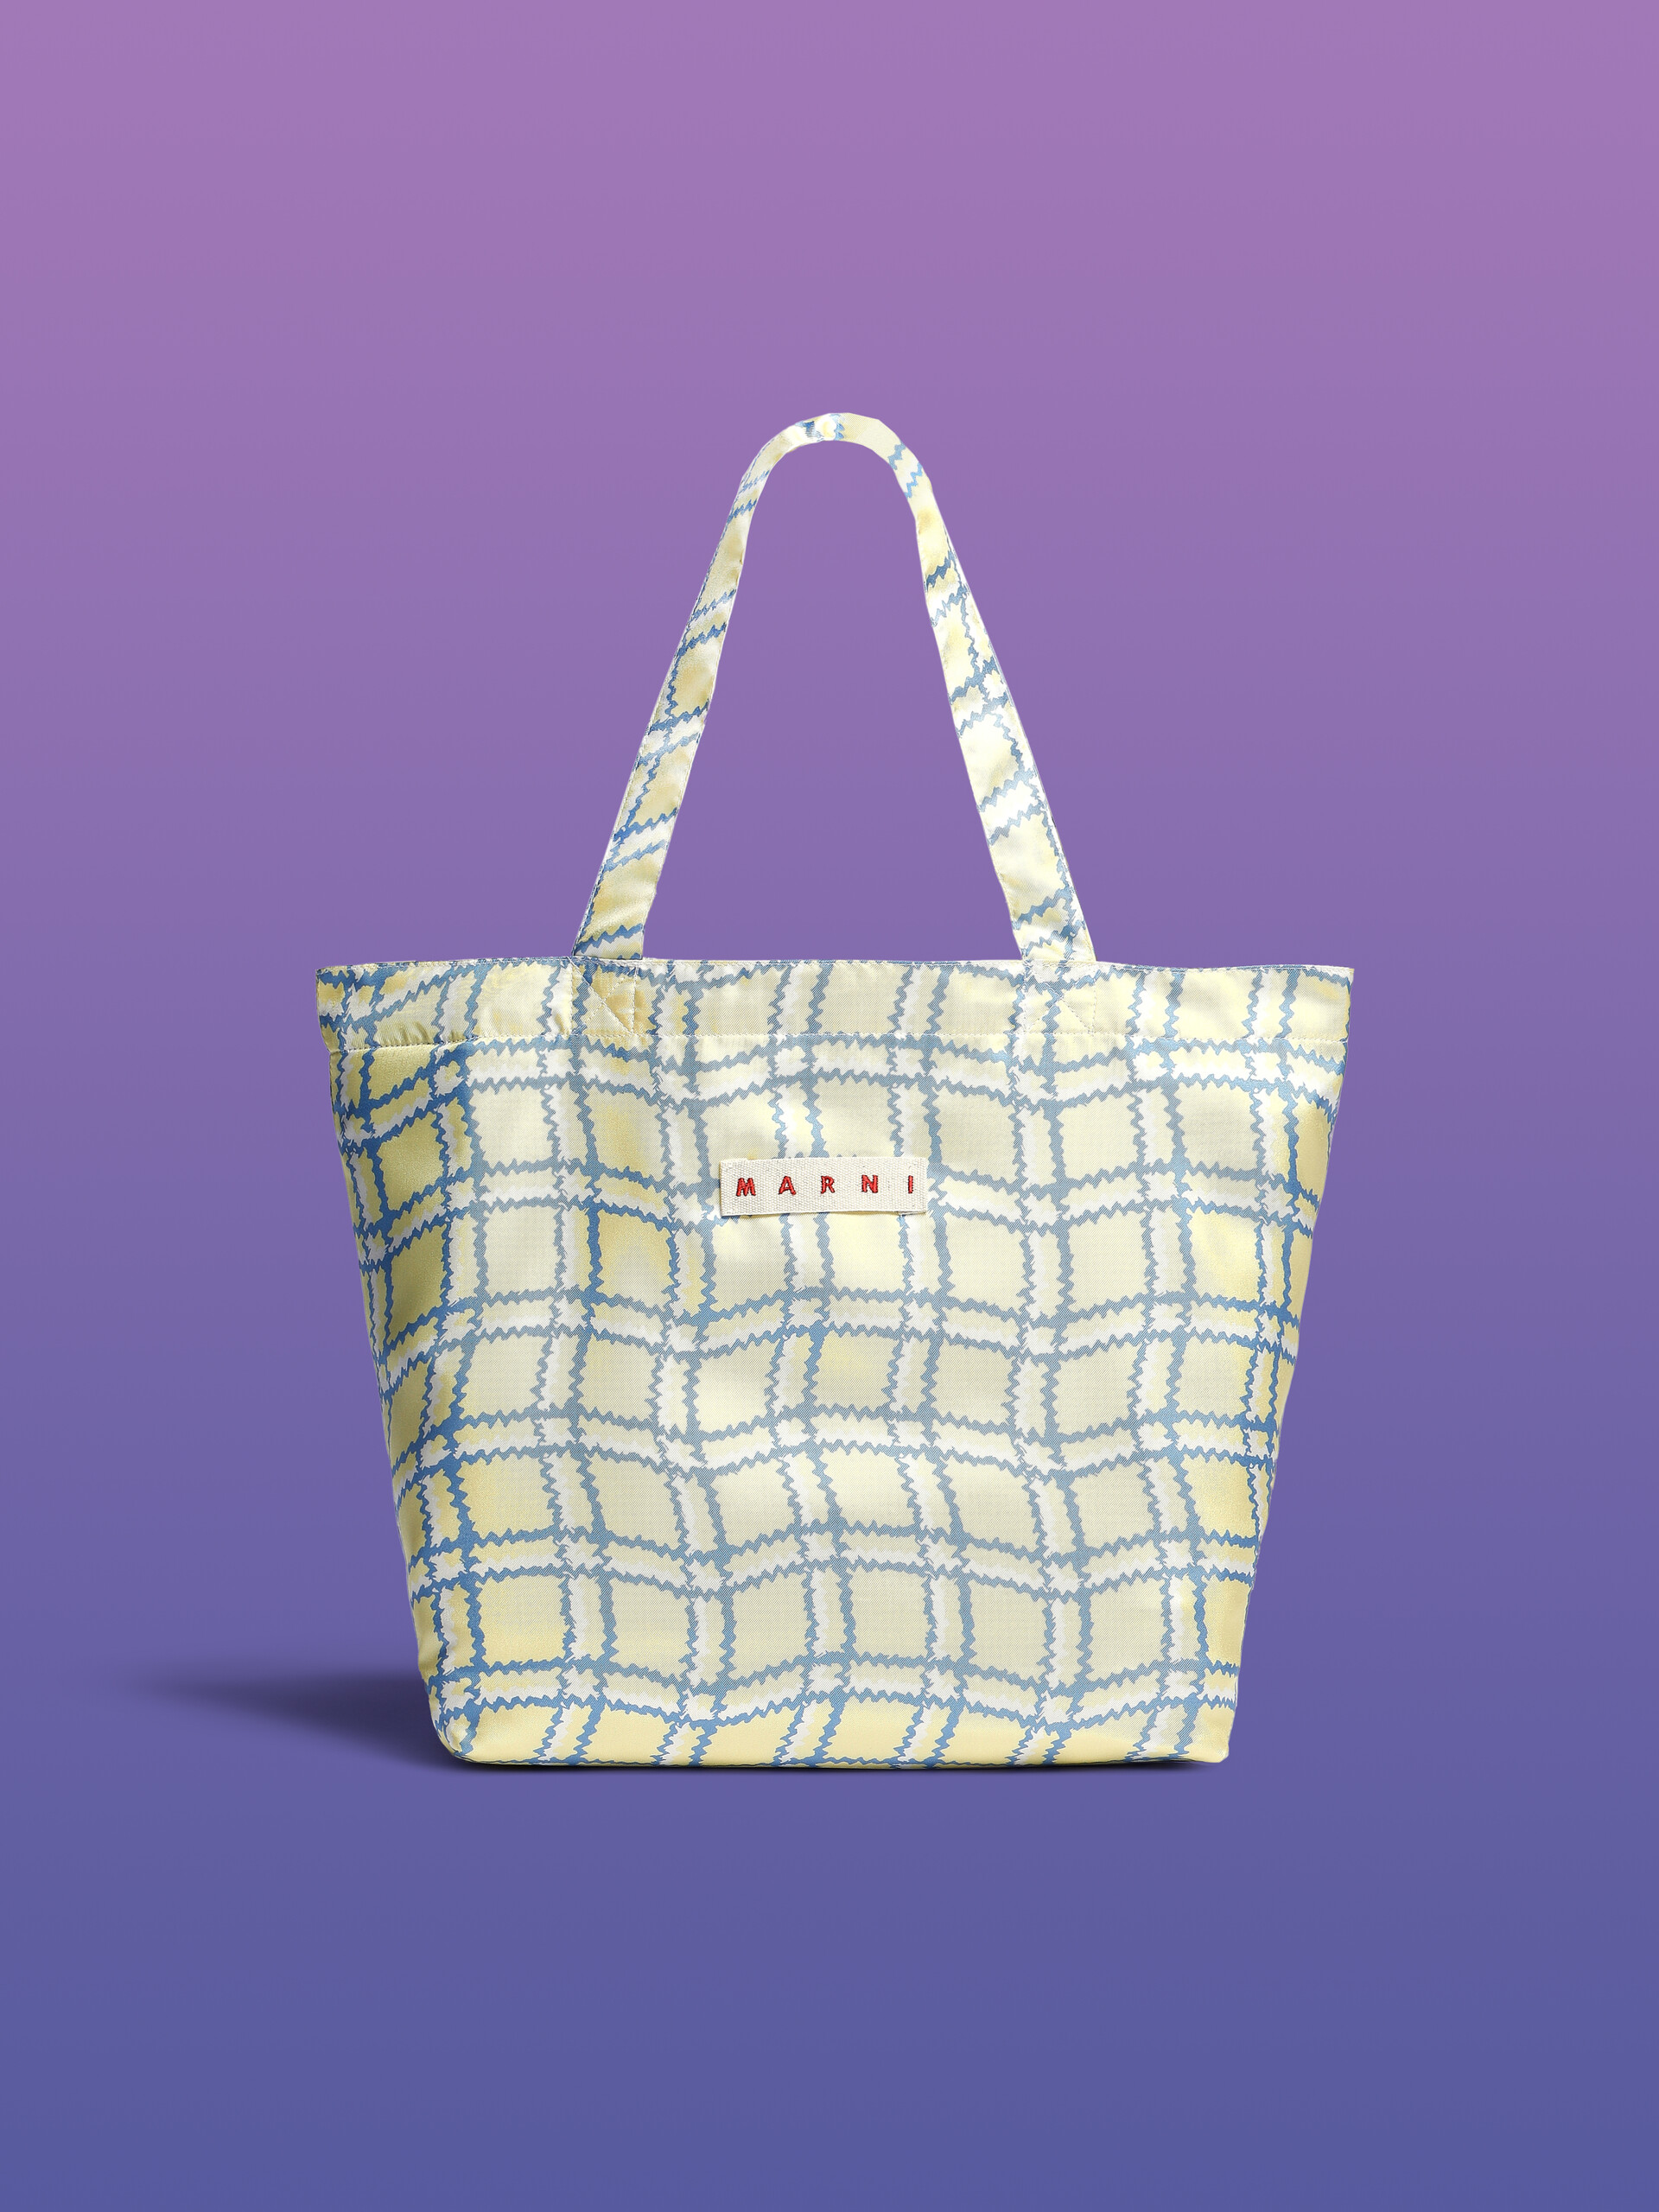 Yellow silk tote bag with archival check print - Shopping Bags - Image 1